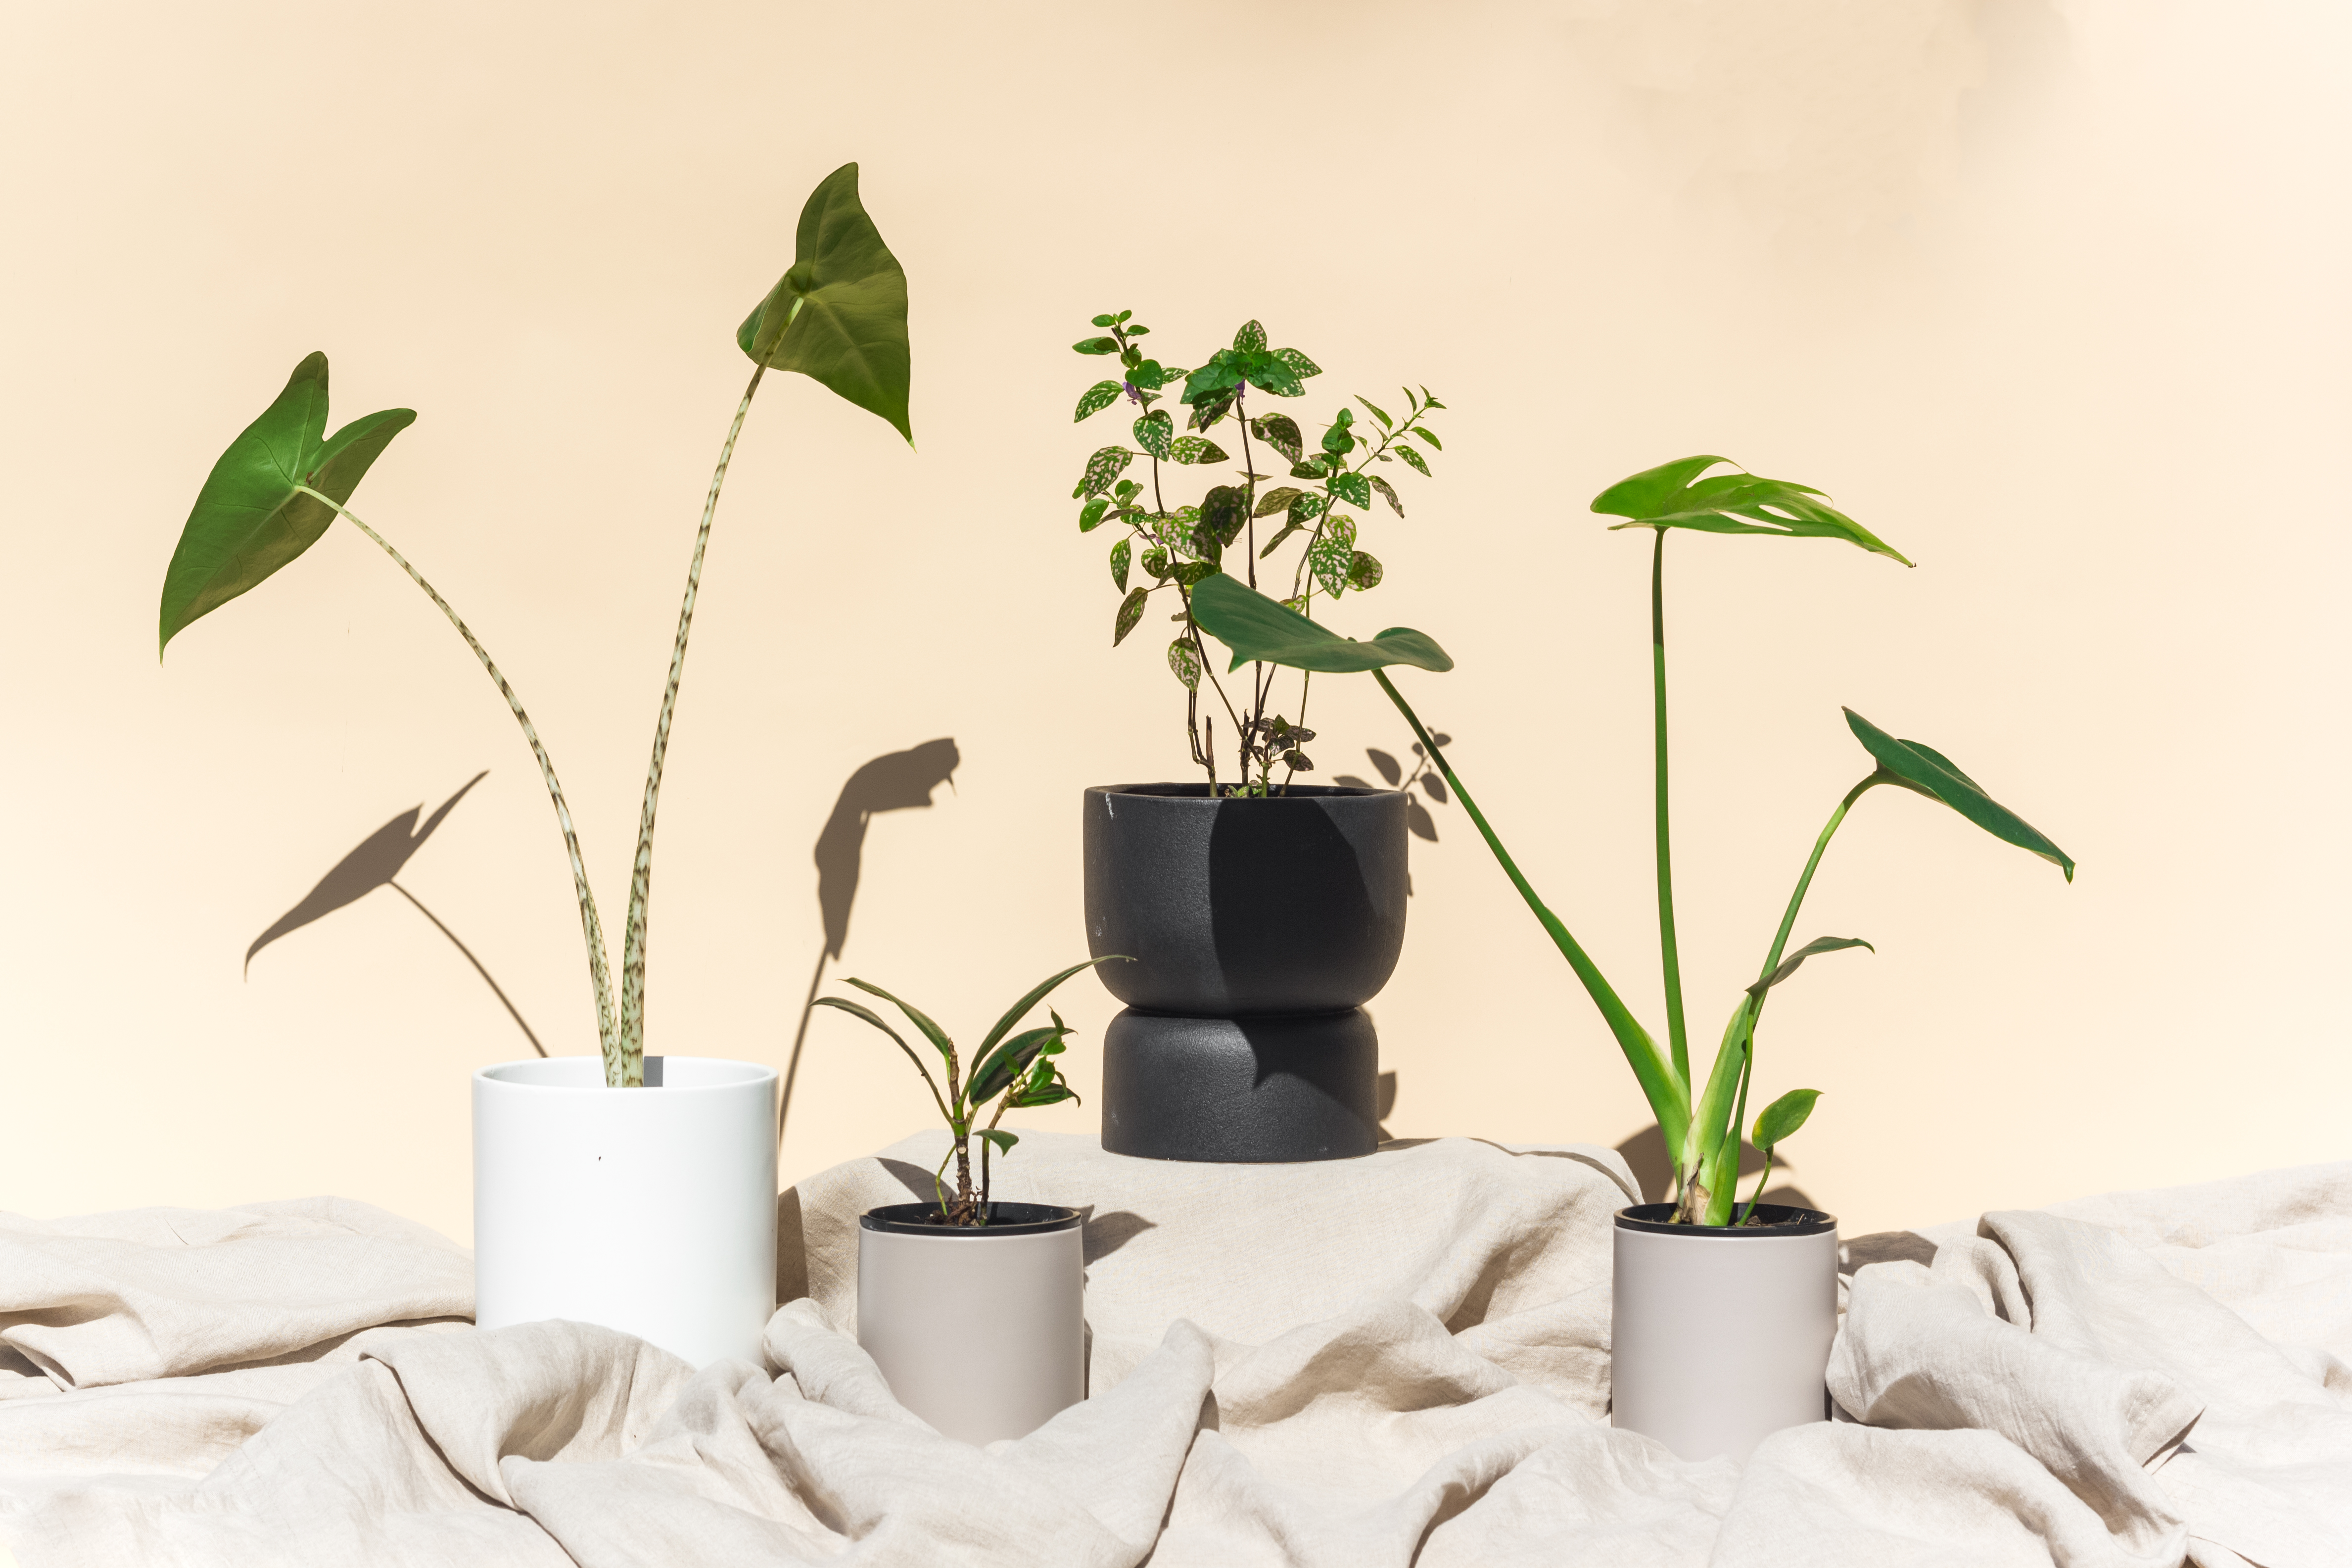 A group of potted plants

Description automatically generated with medium confidence